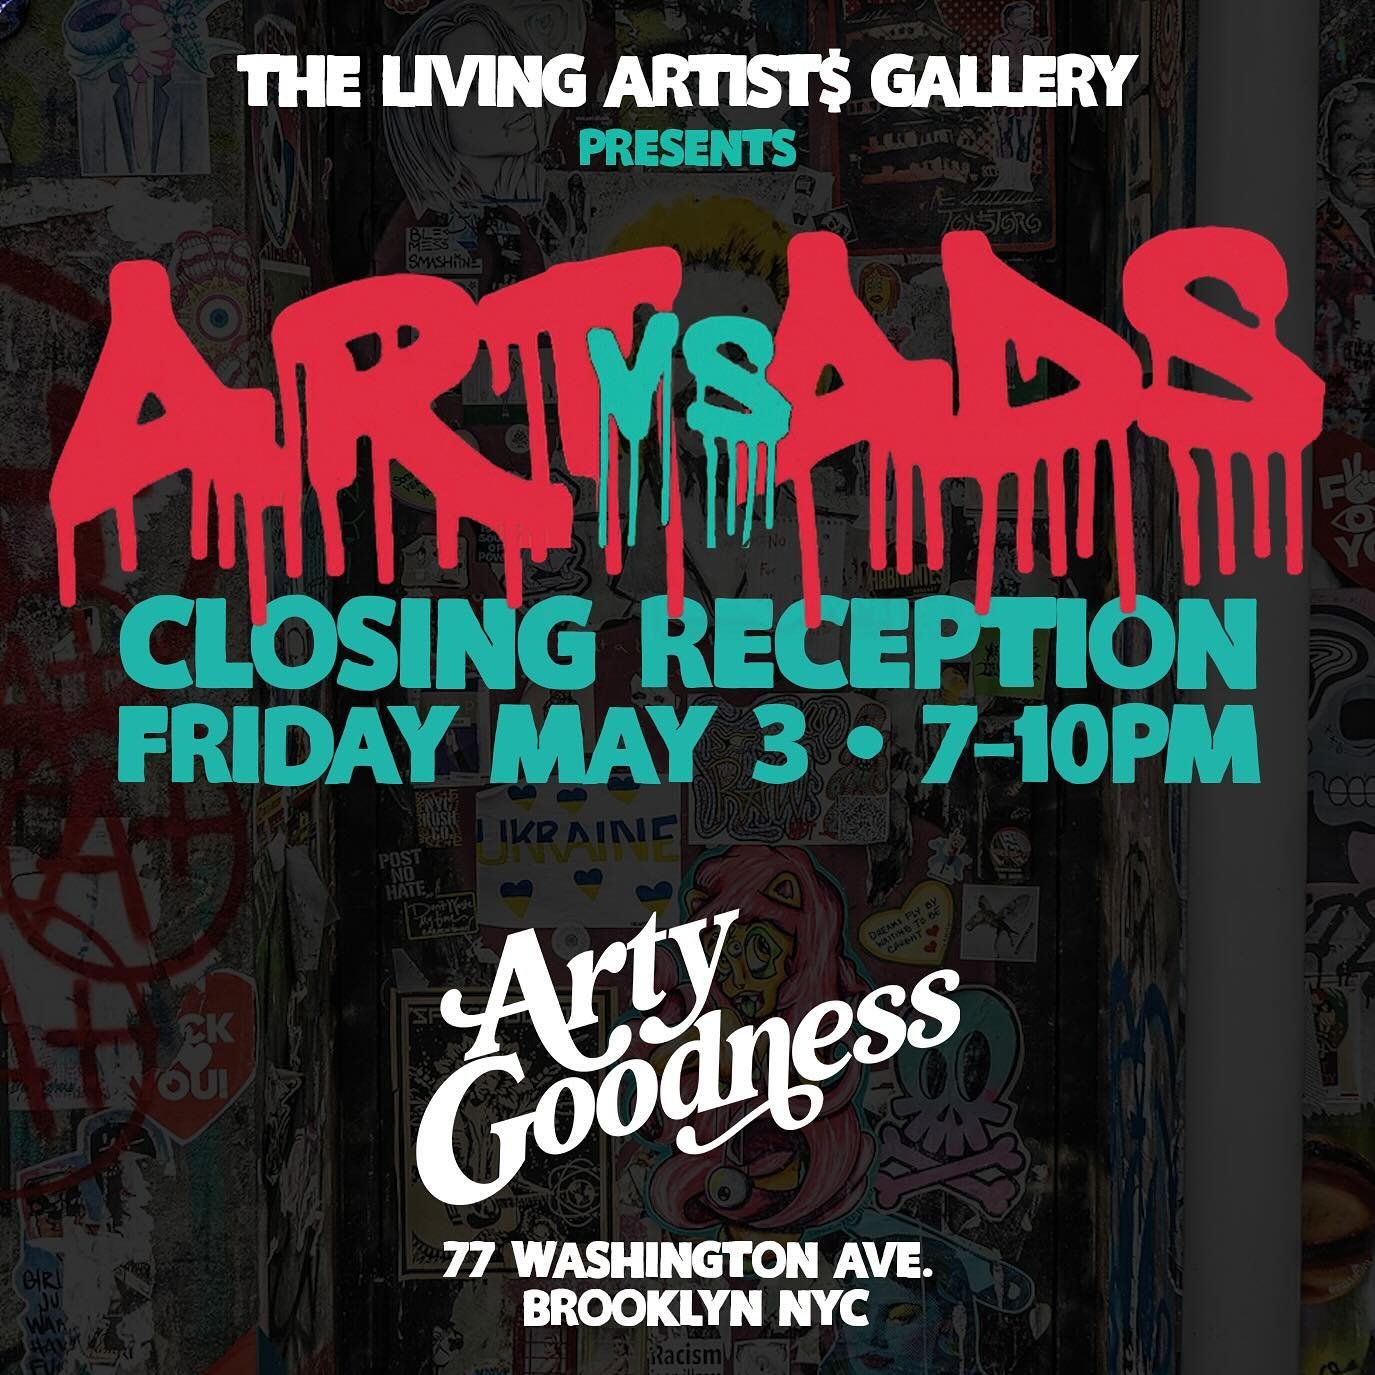 🎉JOIN US this Friday for the closing of ART VS ADS, curated by @thelivingartistsgallery 

There&rsquo;s still a chance to buy original art and merch by some of our favorite living artists. SHOWN HERE:
@hiphopismyreligion
@questionmarks_official
@sac